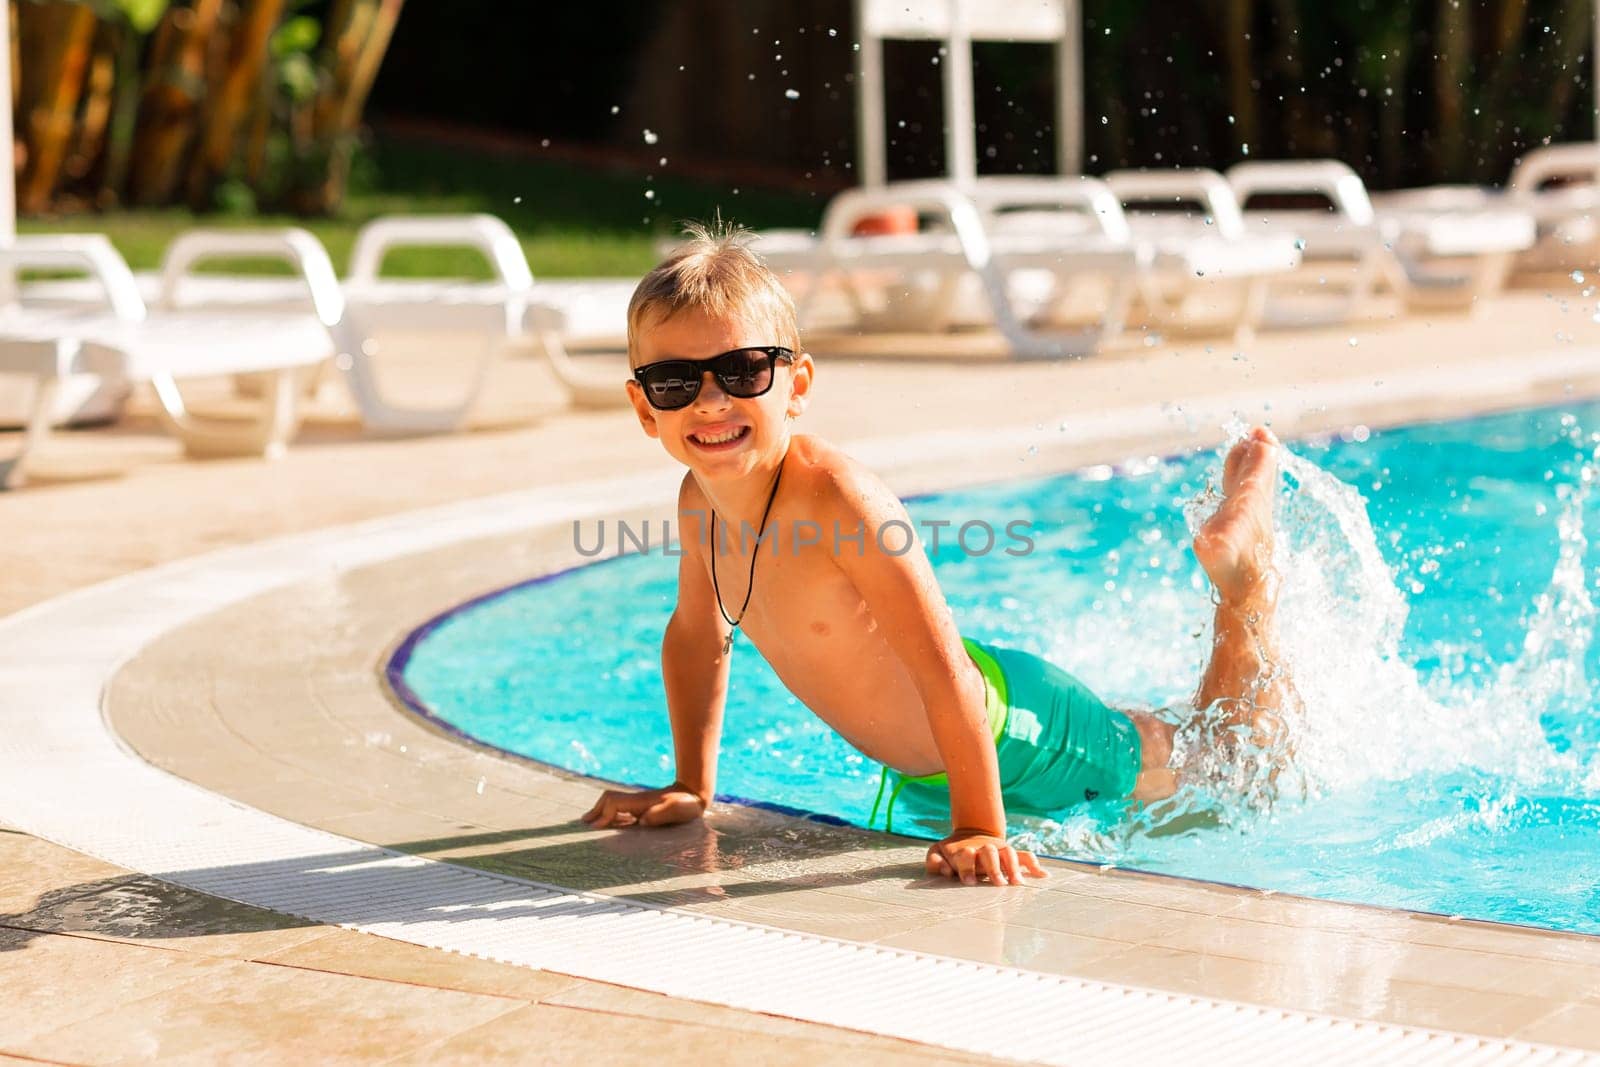 Happy little boy having fun at the pool at the resort by Len44ik